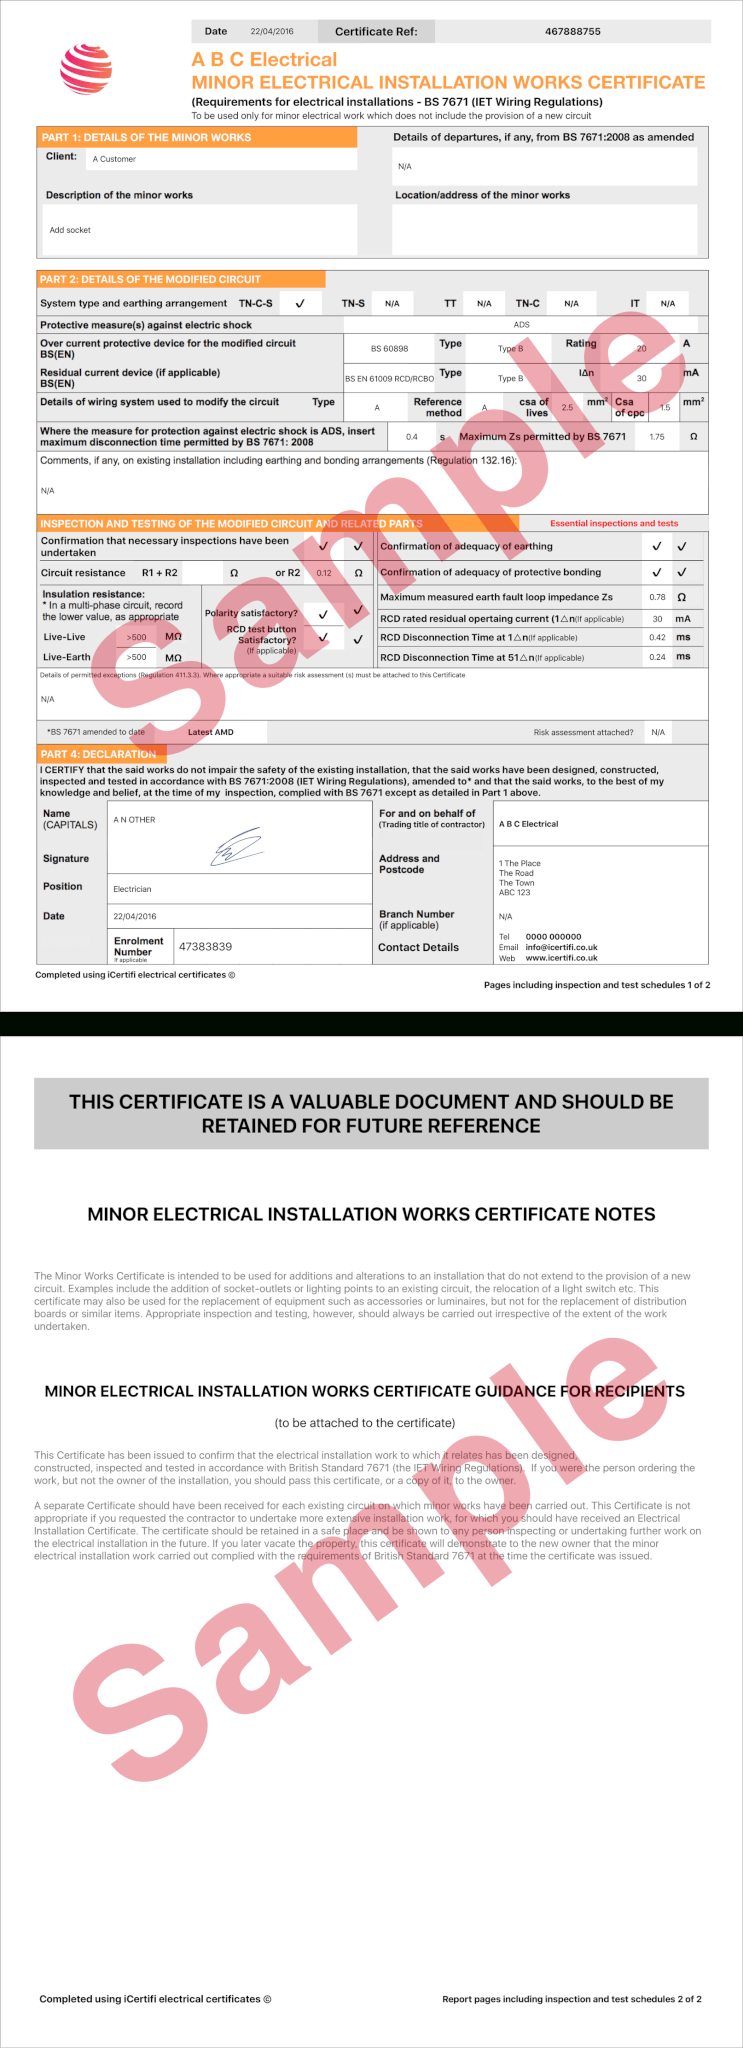 Electrical Certificate - Example Minor Works Certificate For Minor Electrical Installation Works Certificate Template